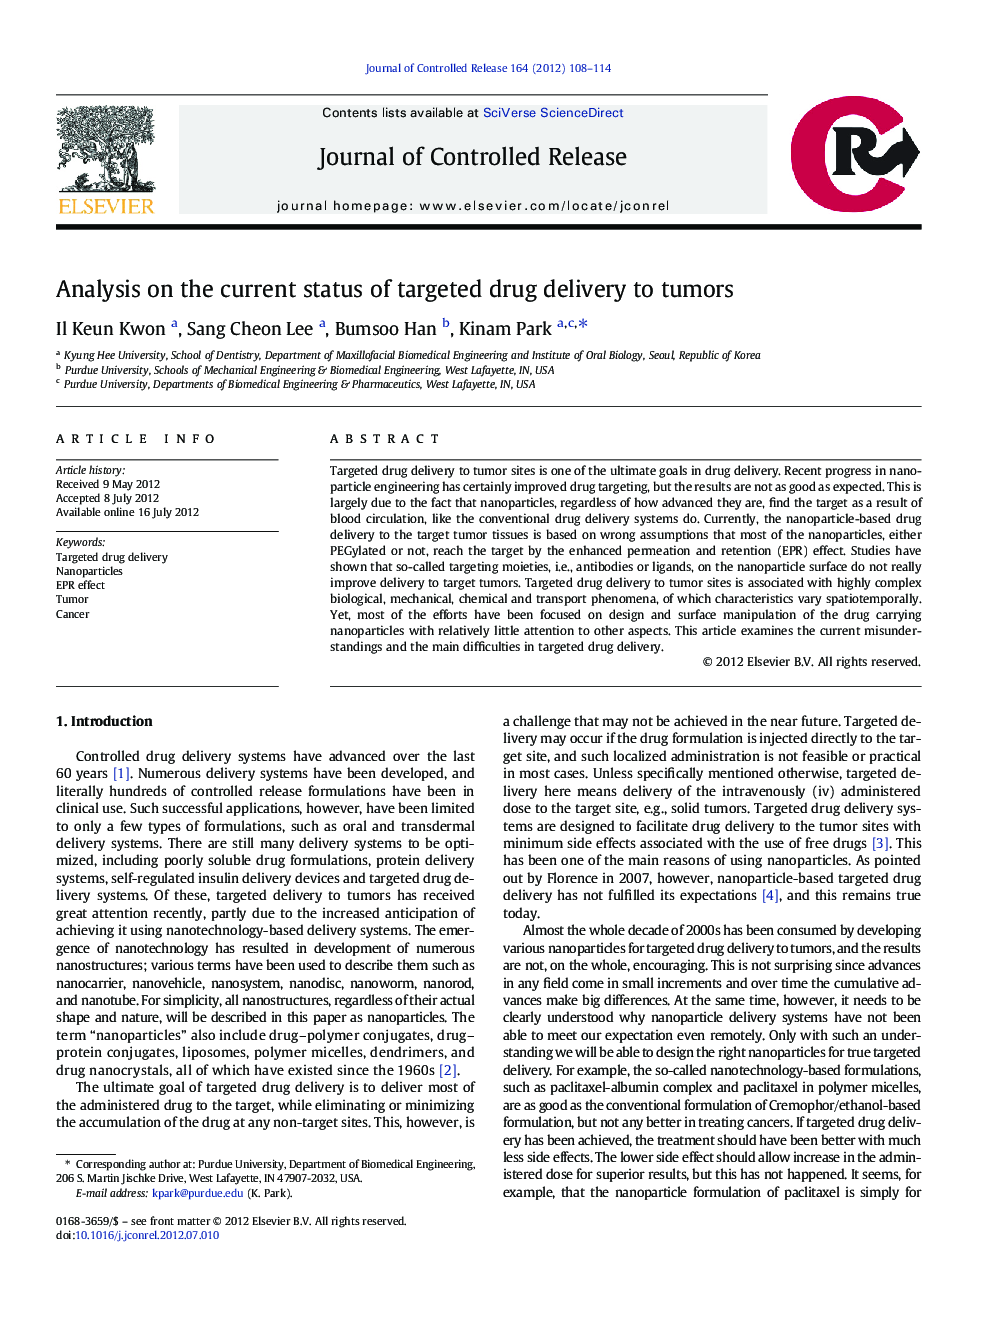 Analysis on the current status of targeted drug delivery to tumors